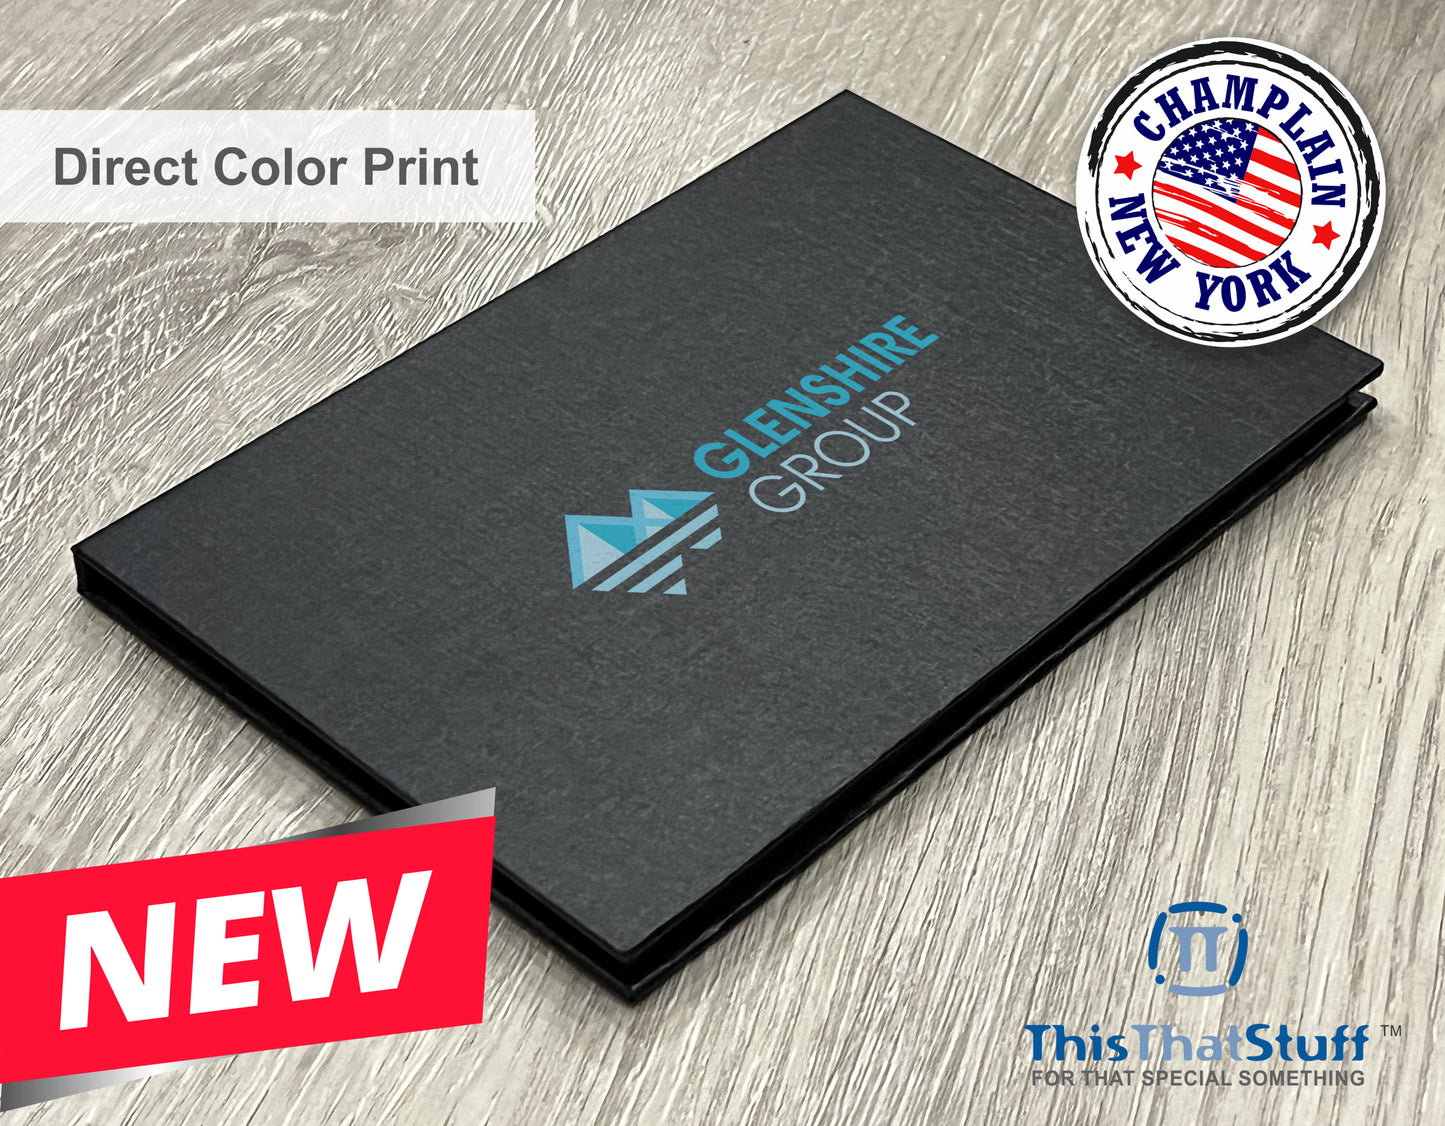 Executive Slim Card Case. Black linen finish with matte lamination ready for your custom logo or message.